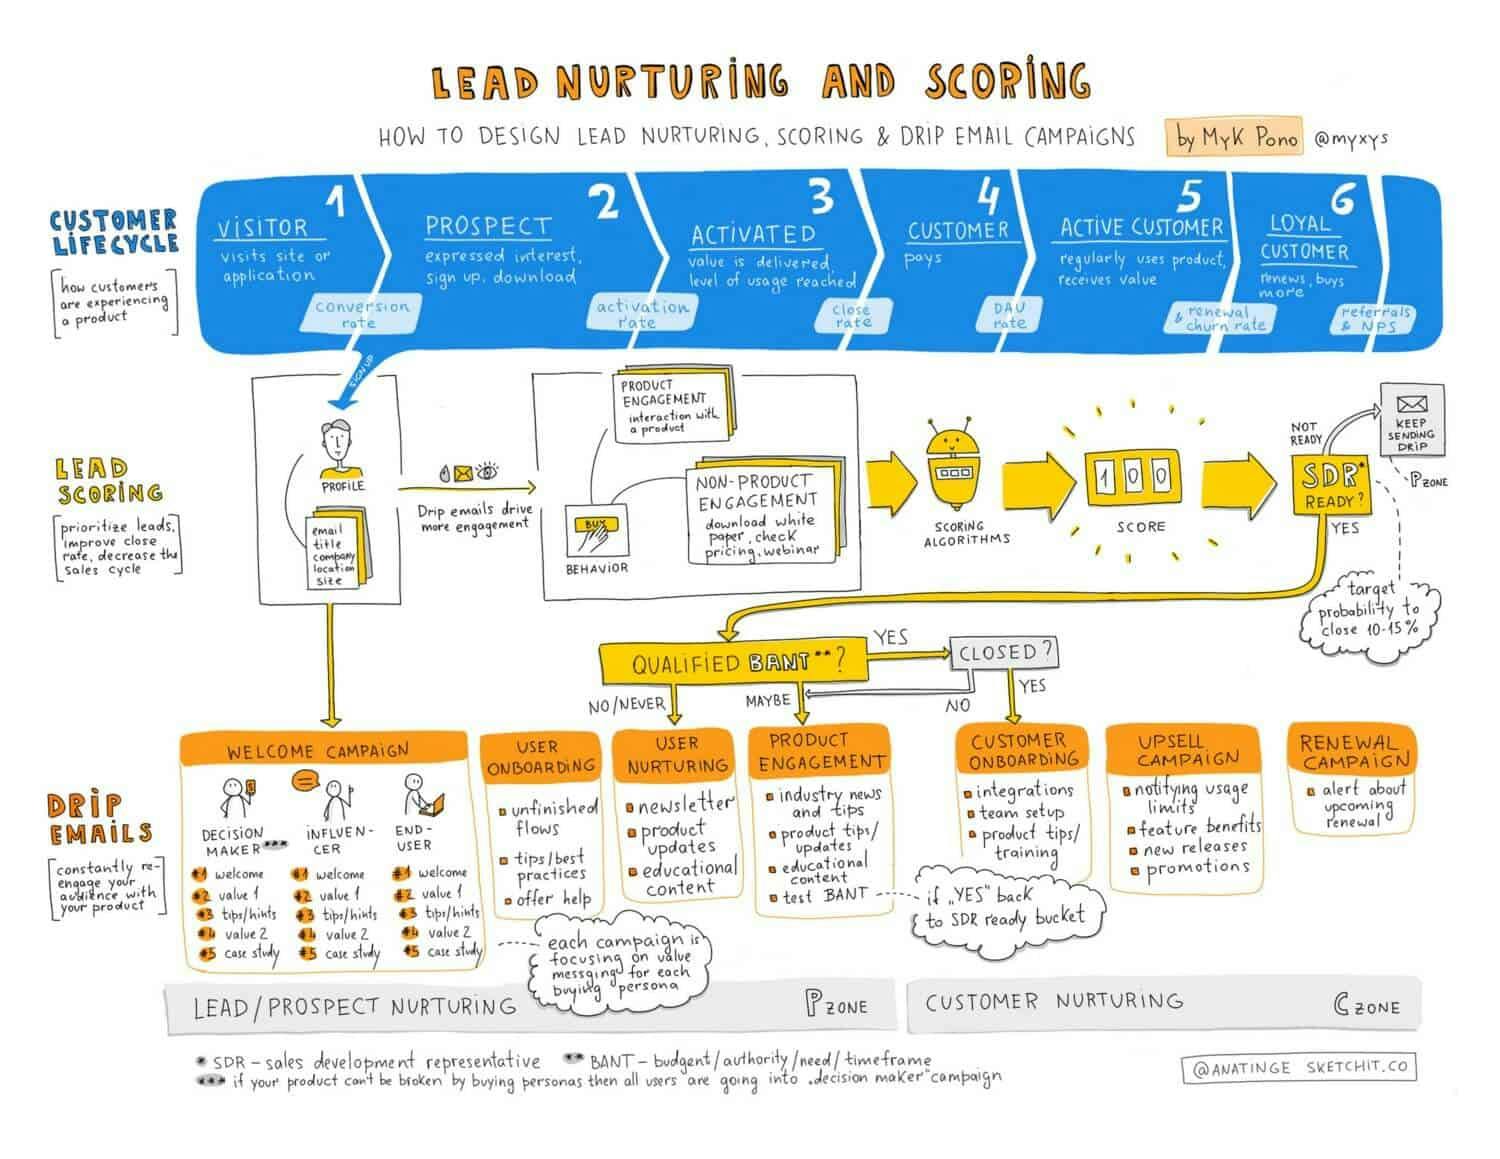 how does a lead nurturing and scoring model can look for a b2b saas company